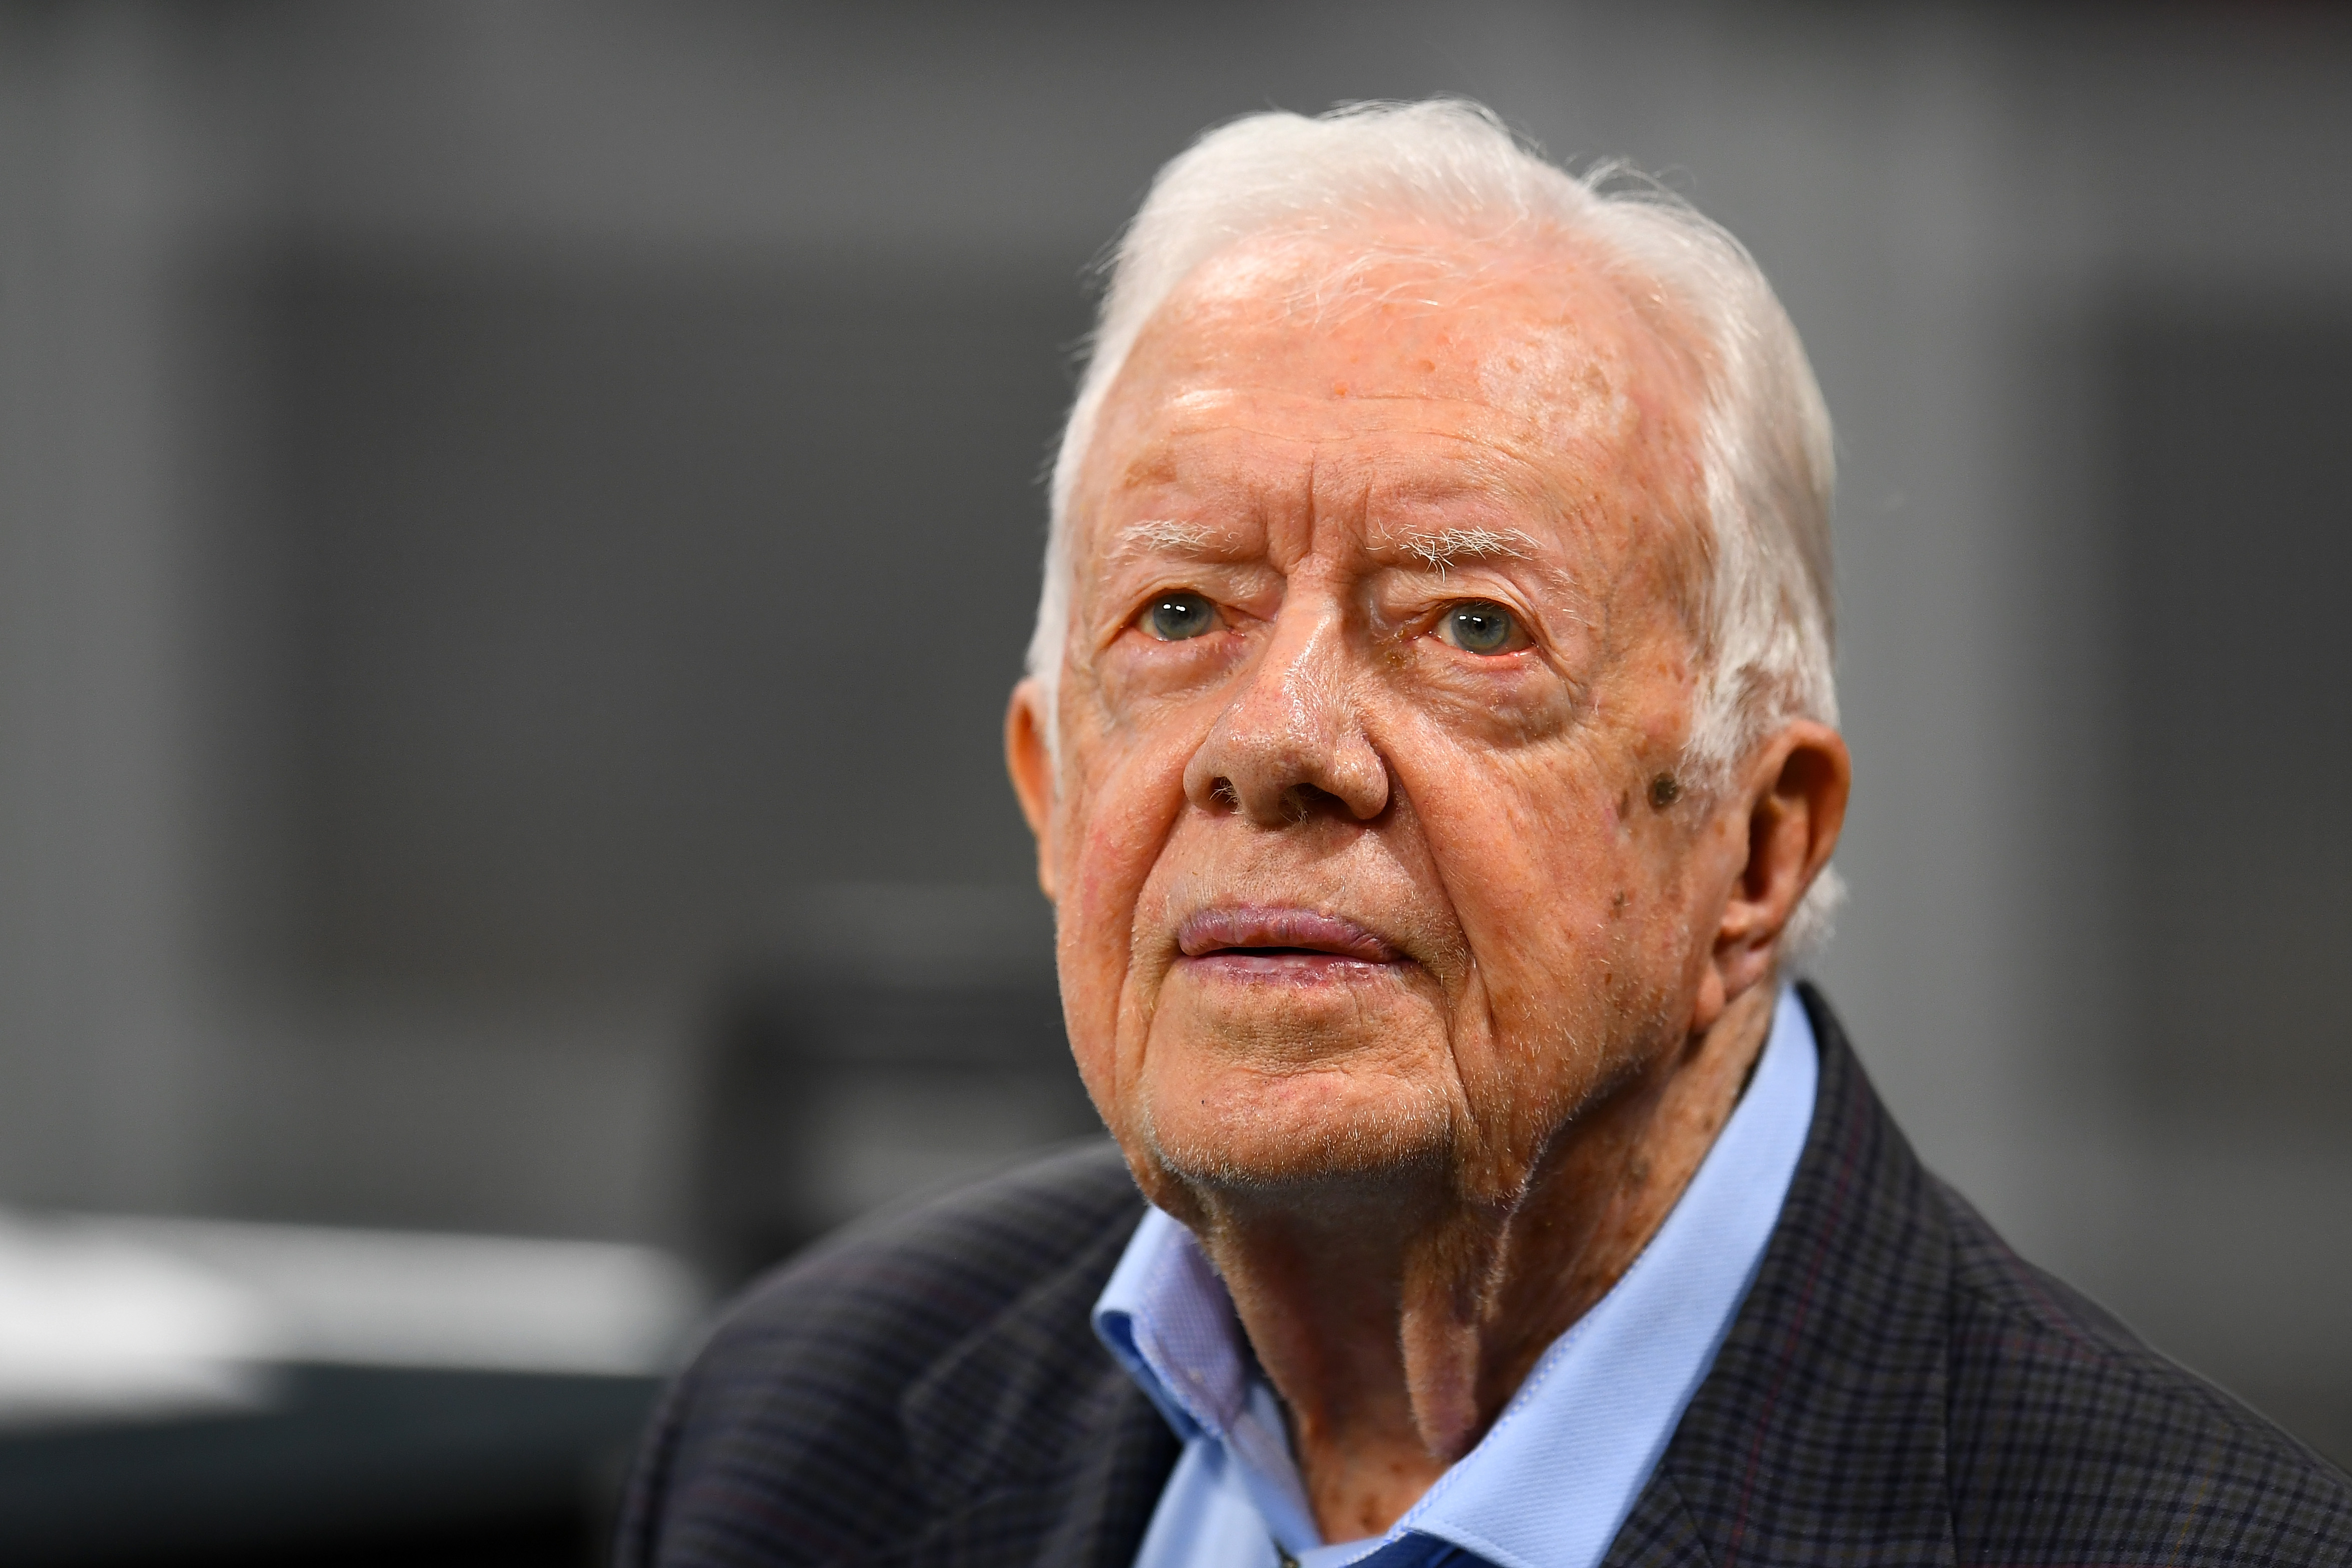 Jimmy Carter attending a game between the Atlanta Falcons and the Cincinnati Bengals on September 30, 2018 in Plains, Georgia | Source: Getty Images